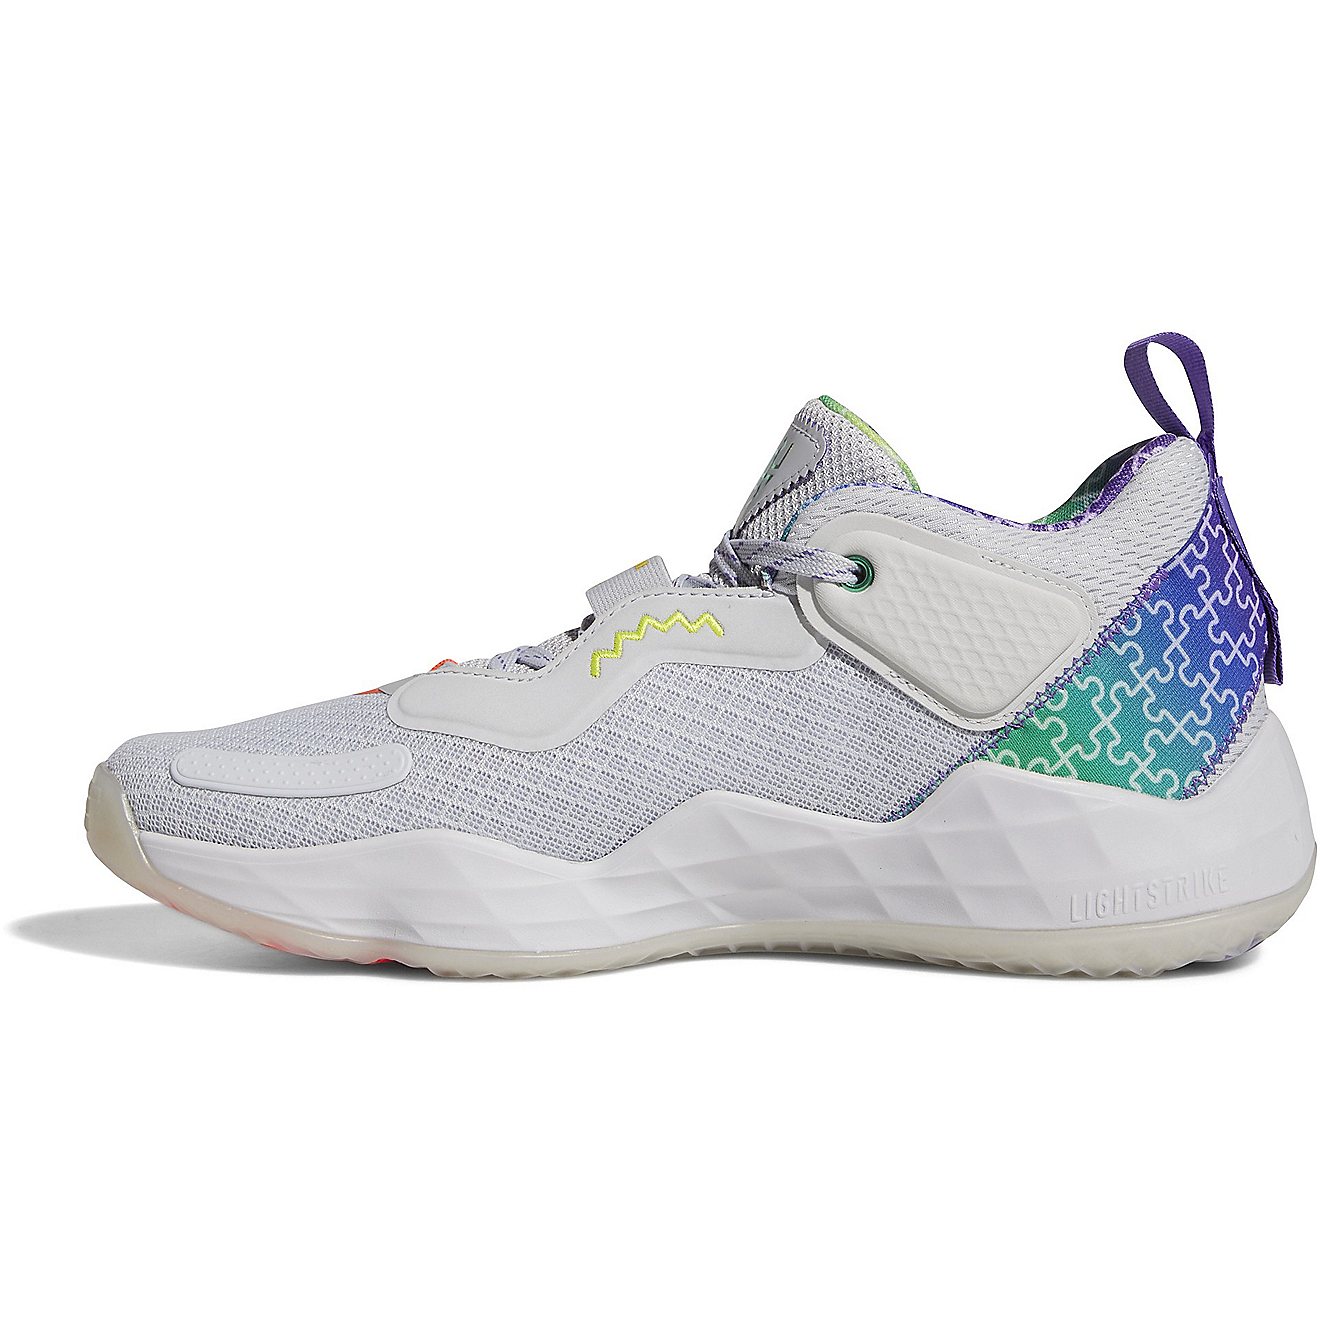 adidas Men's D.O.N. Issue 3 Basketball Shoes | Academy